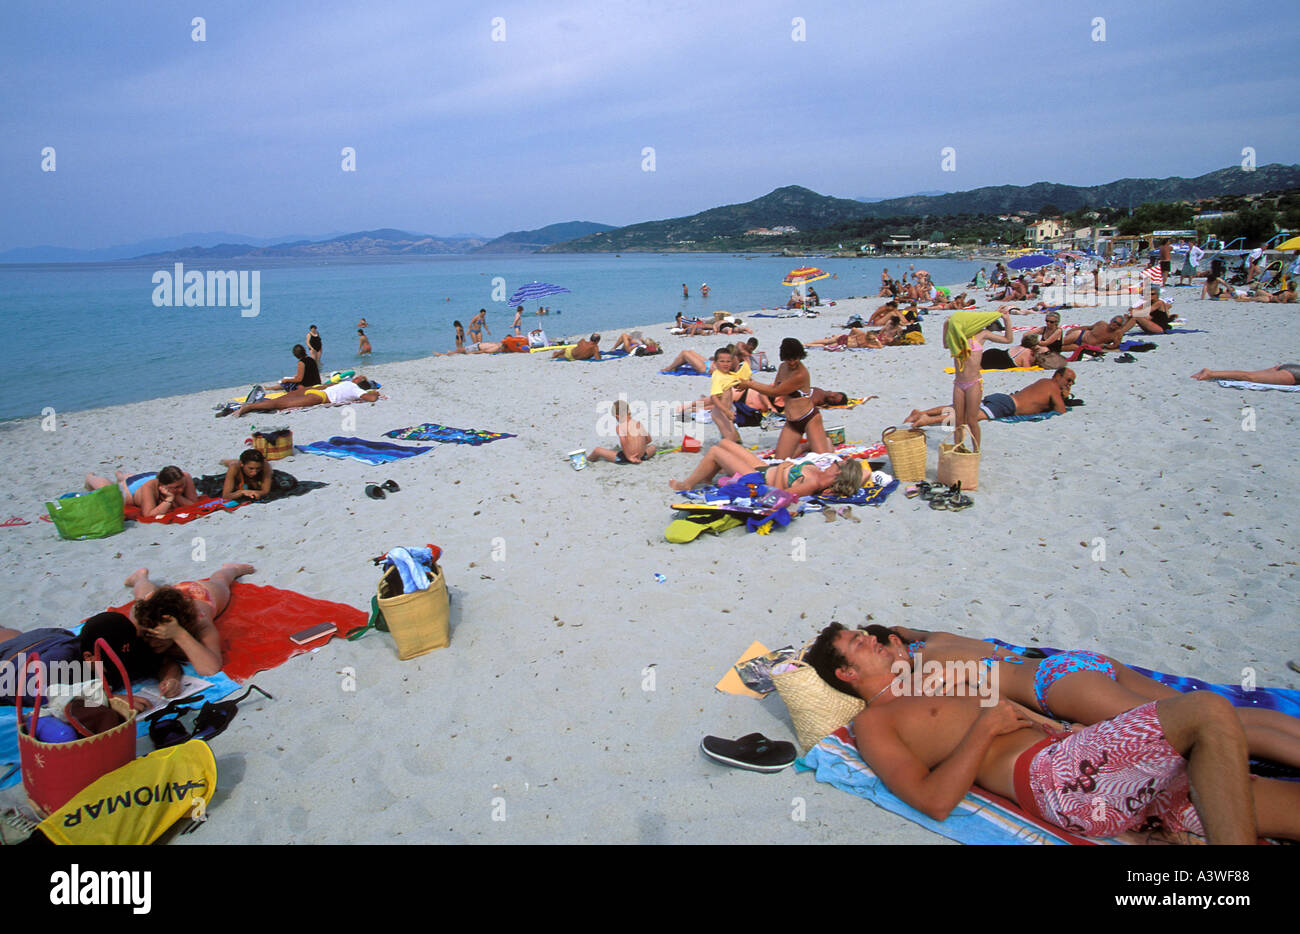 the beach at I lle Rousse Corsica Island France Stock Photo